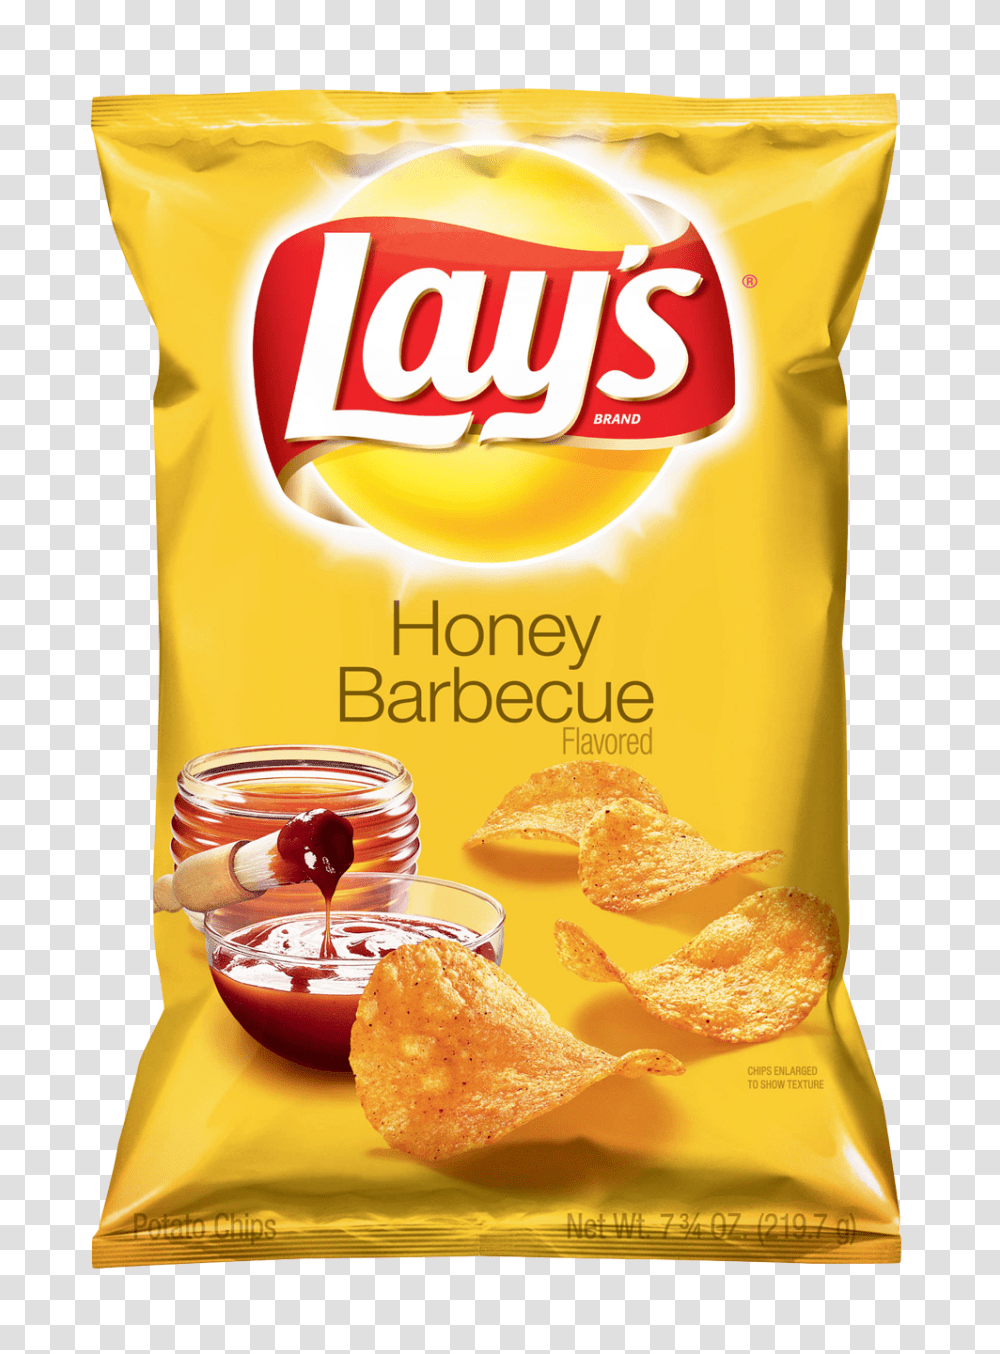 Lays Potato Chips Pack Image, Food, Ketchup, Bread, Honey Transparent Png